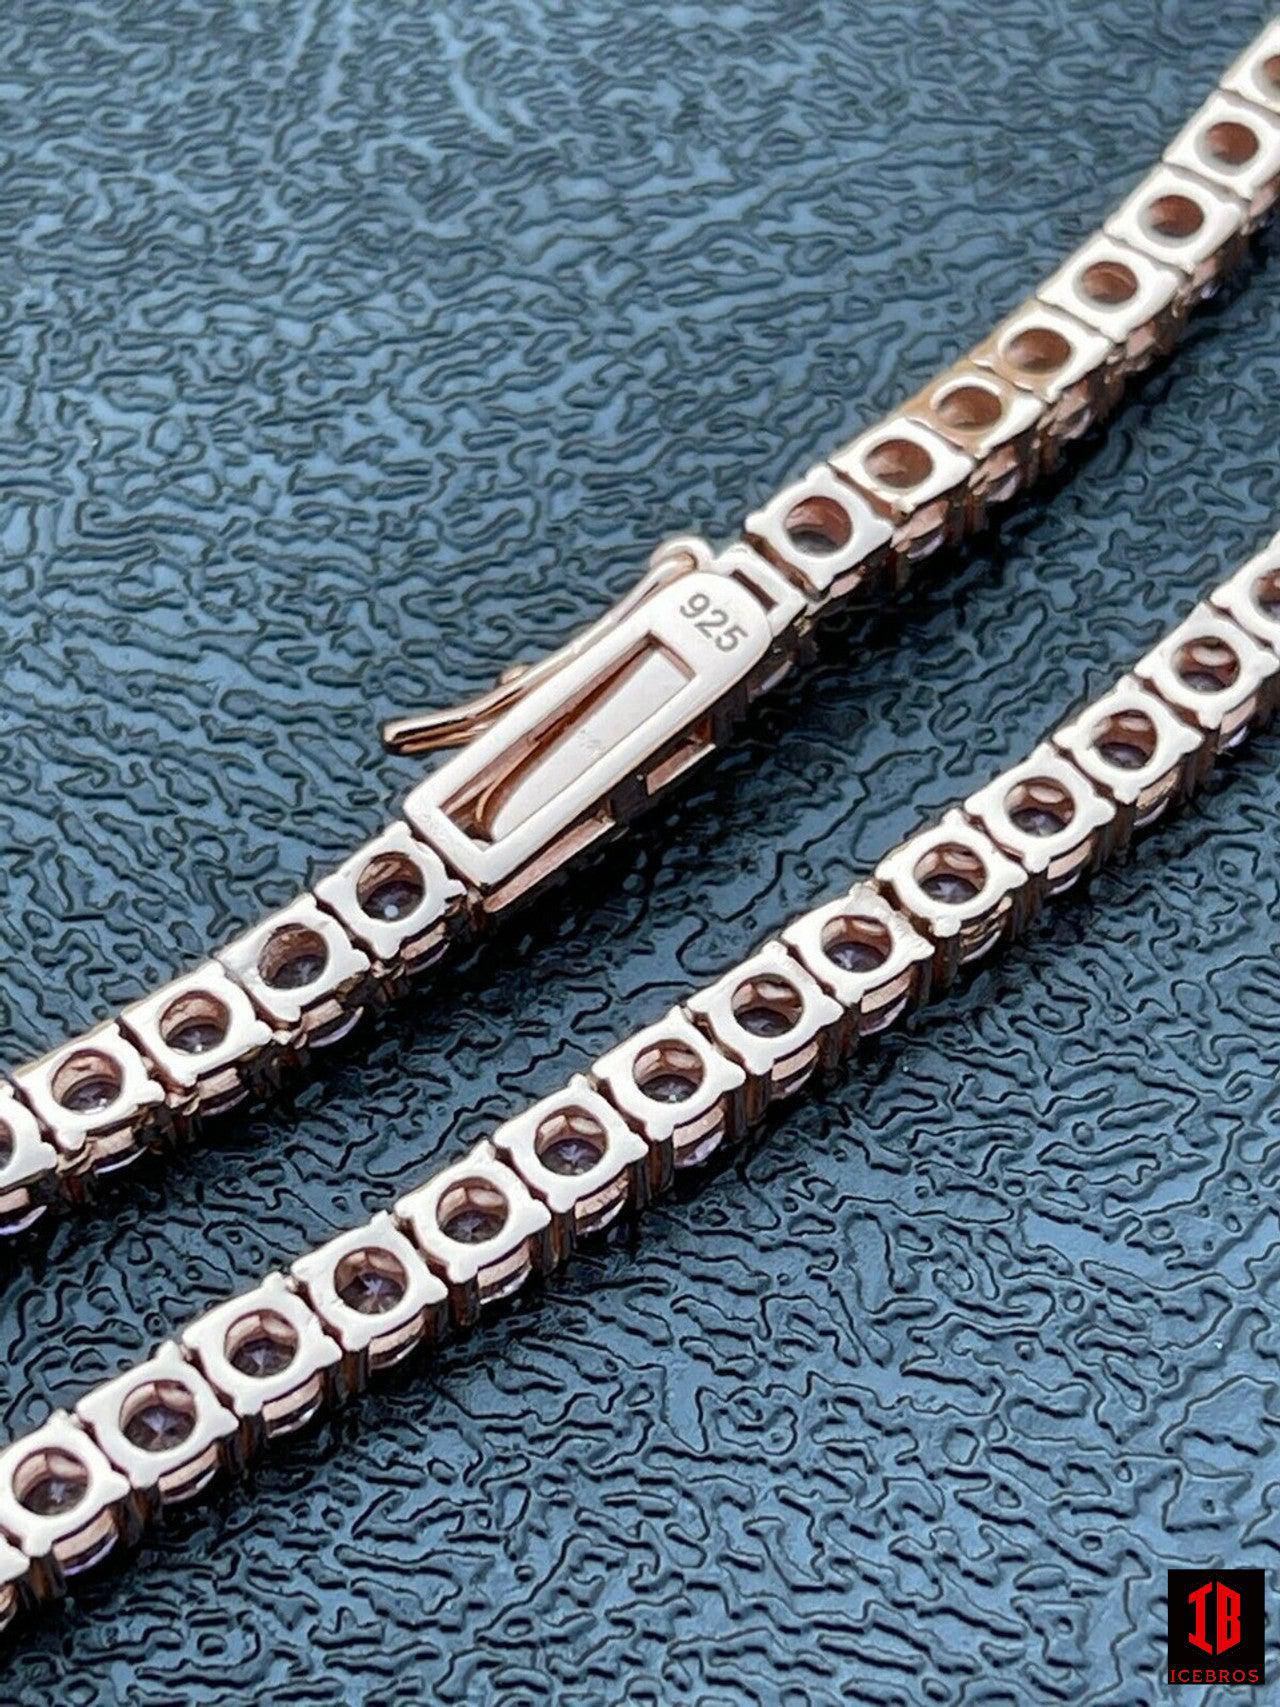 Tennis Chain Real 925 Sterling Silver 14k Rose Gold Finish Pink cz Diamond Necklace - 2 sizes